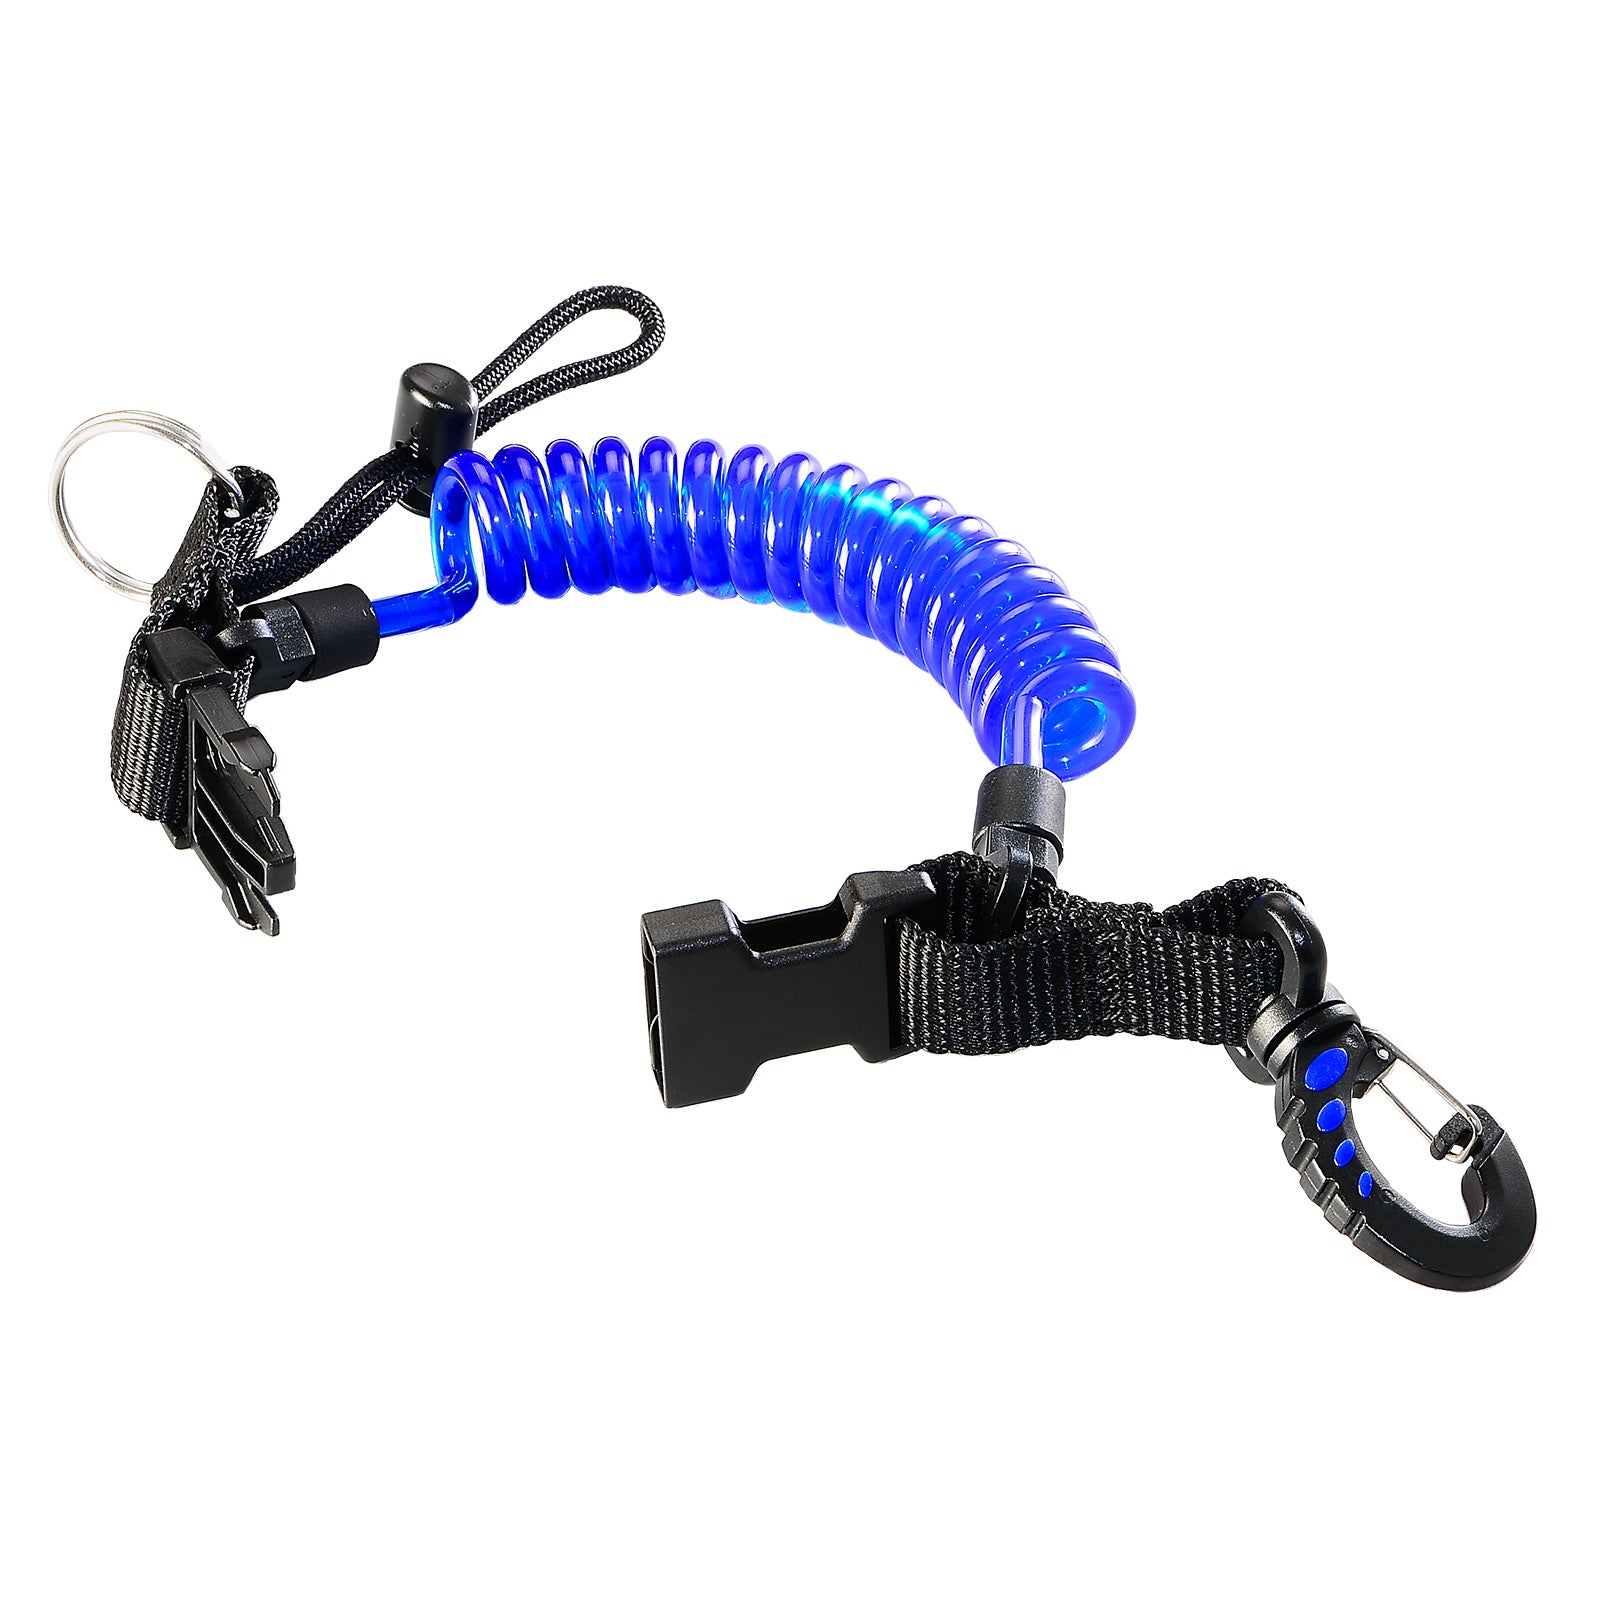 Coil lanyard with plastic clip